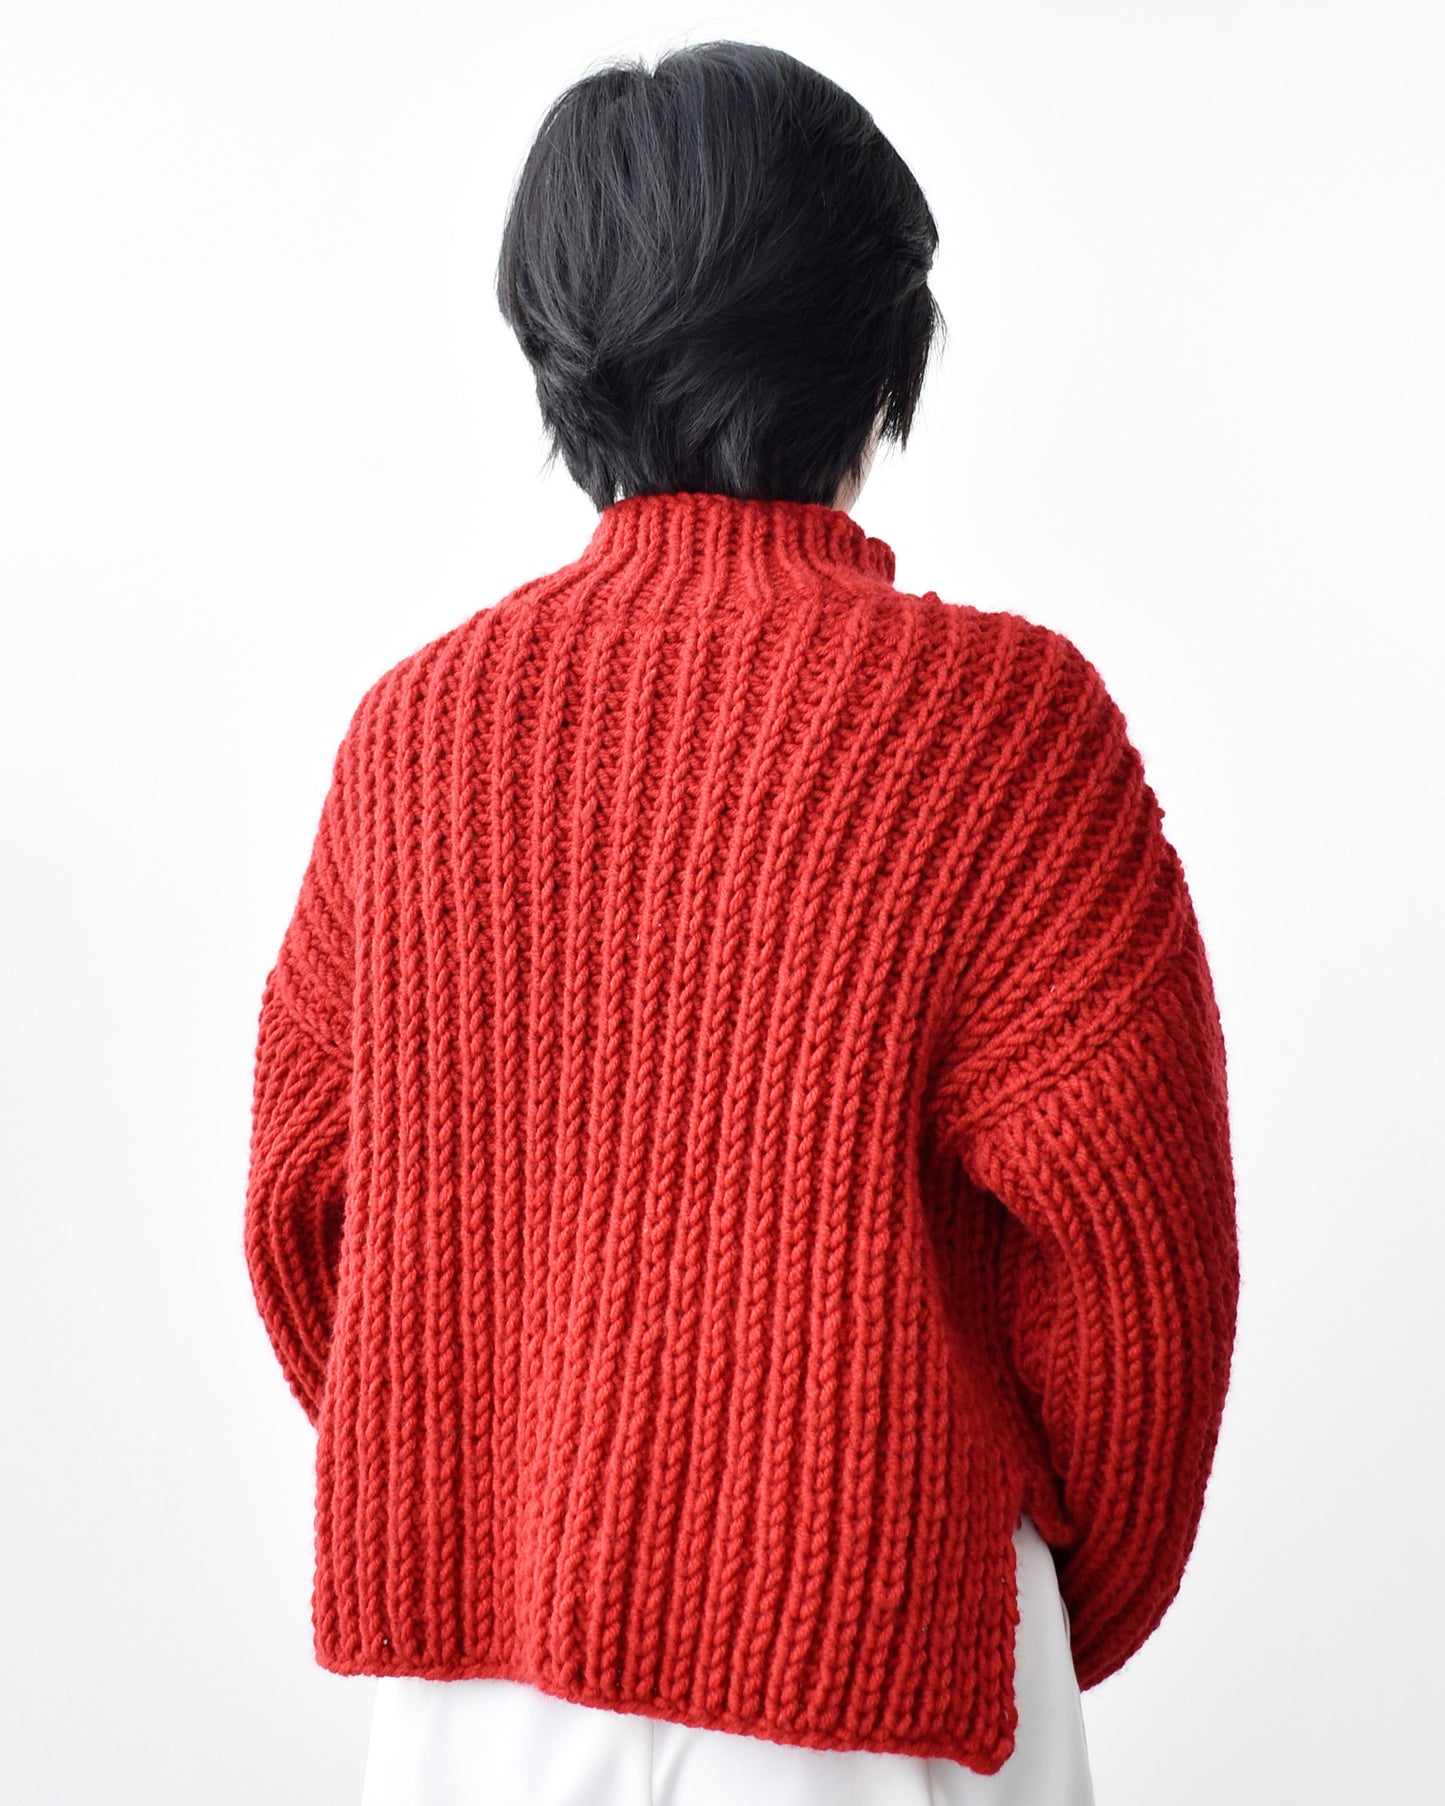 NY knitted sweater – RECIPROCATE